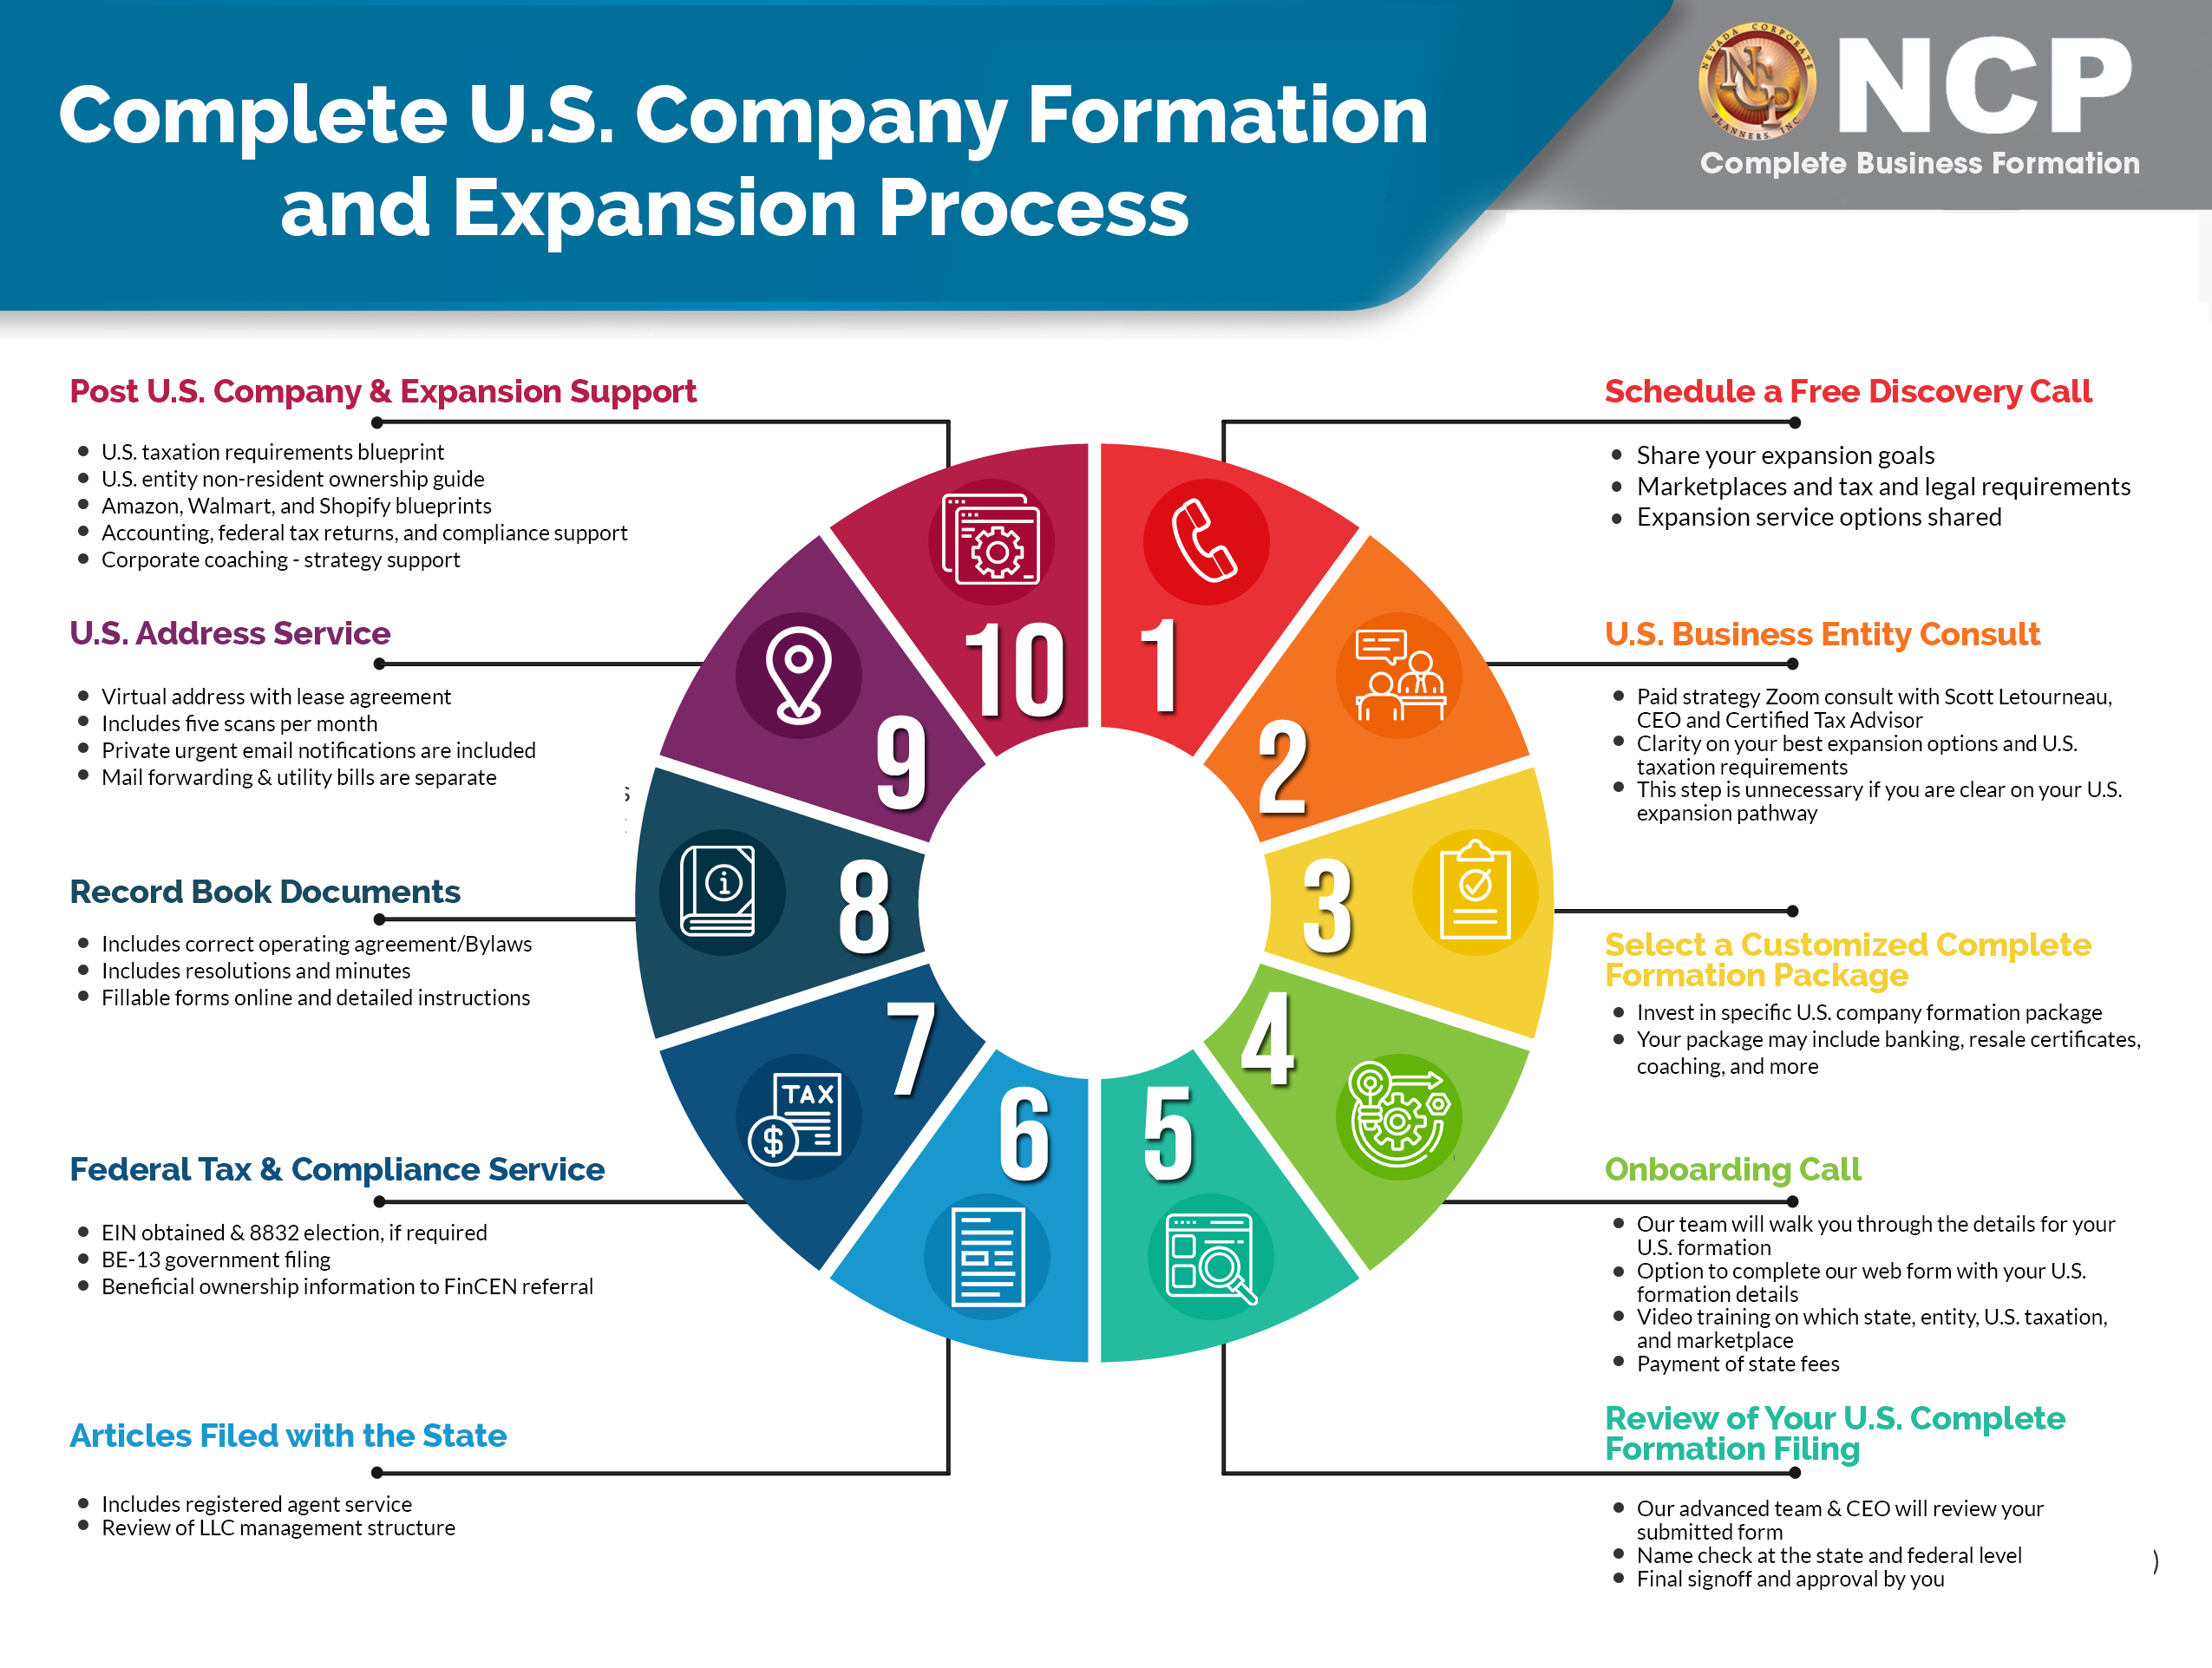 Complete U.S. Company Formation and Expansion Process with NCP